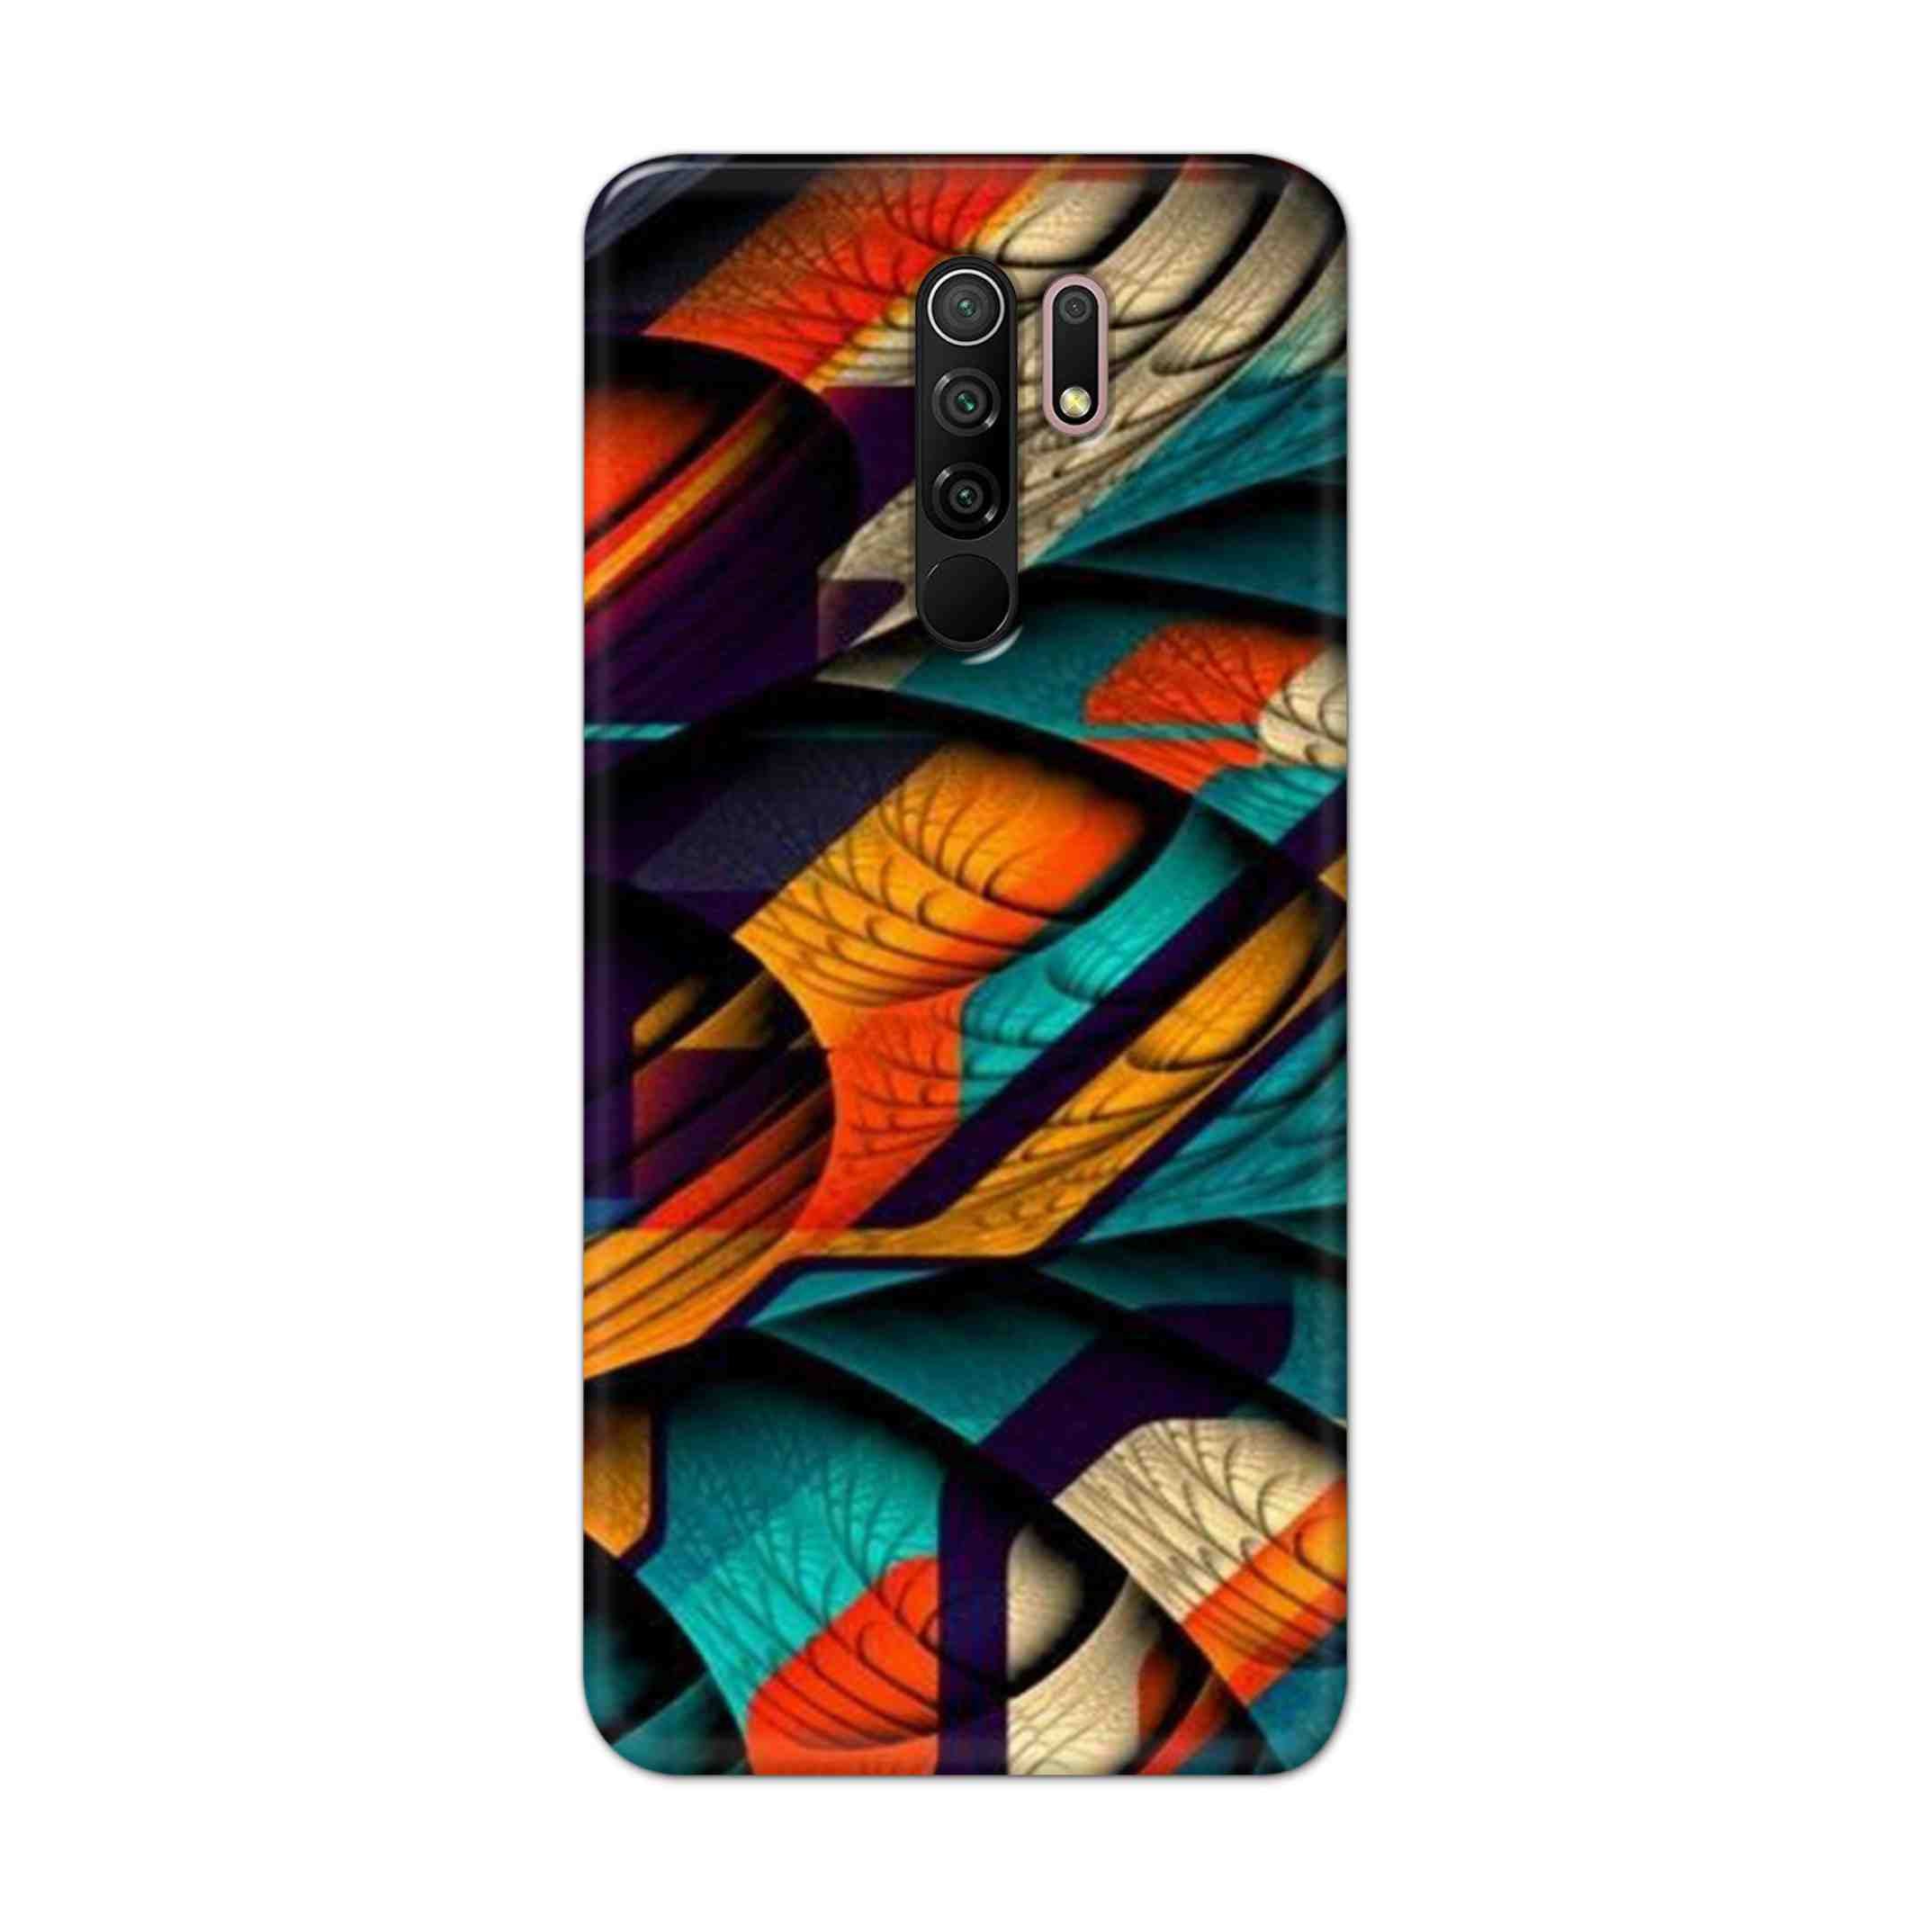 Buy Colour Abstract Hard Back Mobile Phone Case Cover For Xiaomi Redmi 9 Prime Online